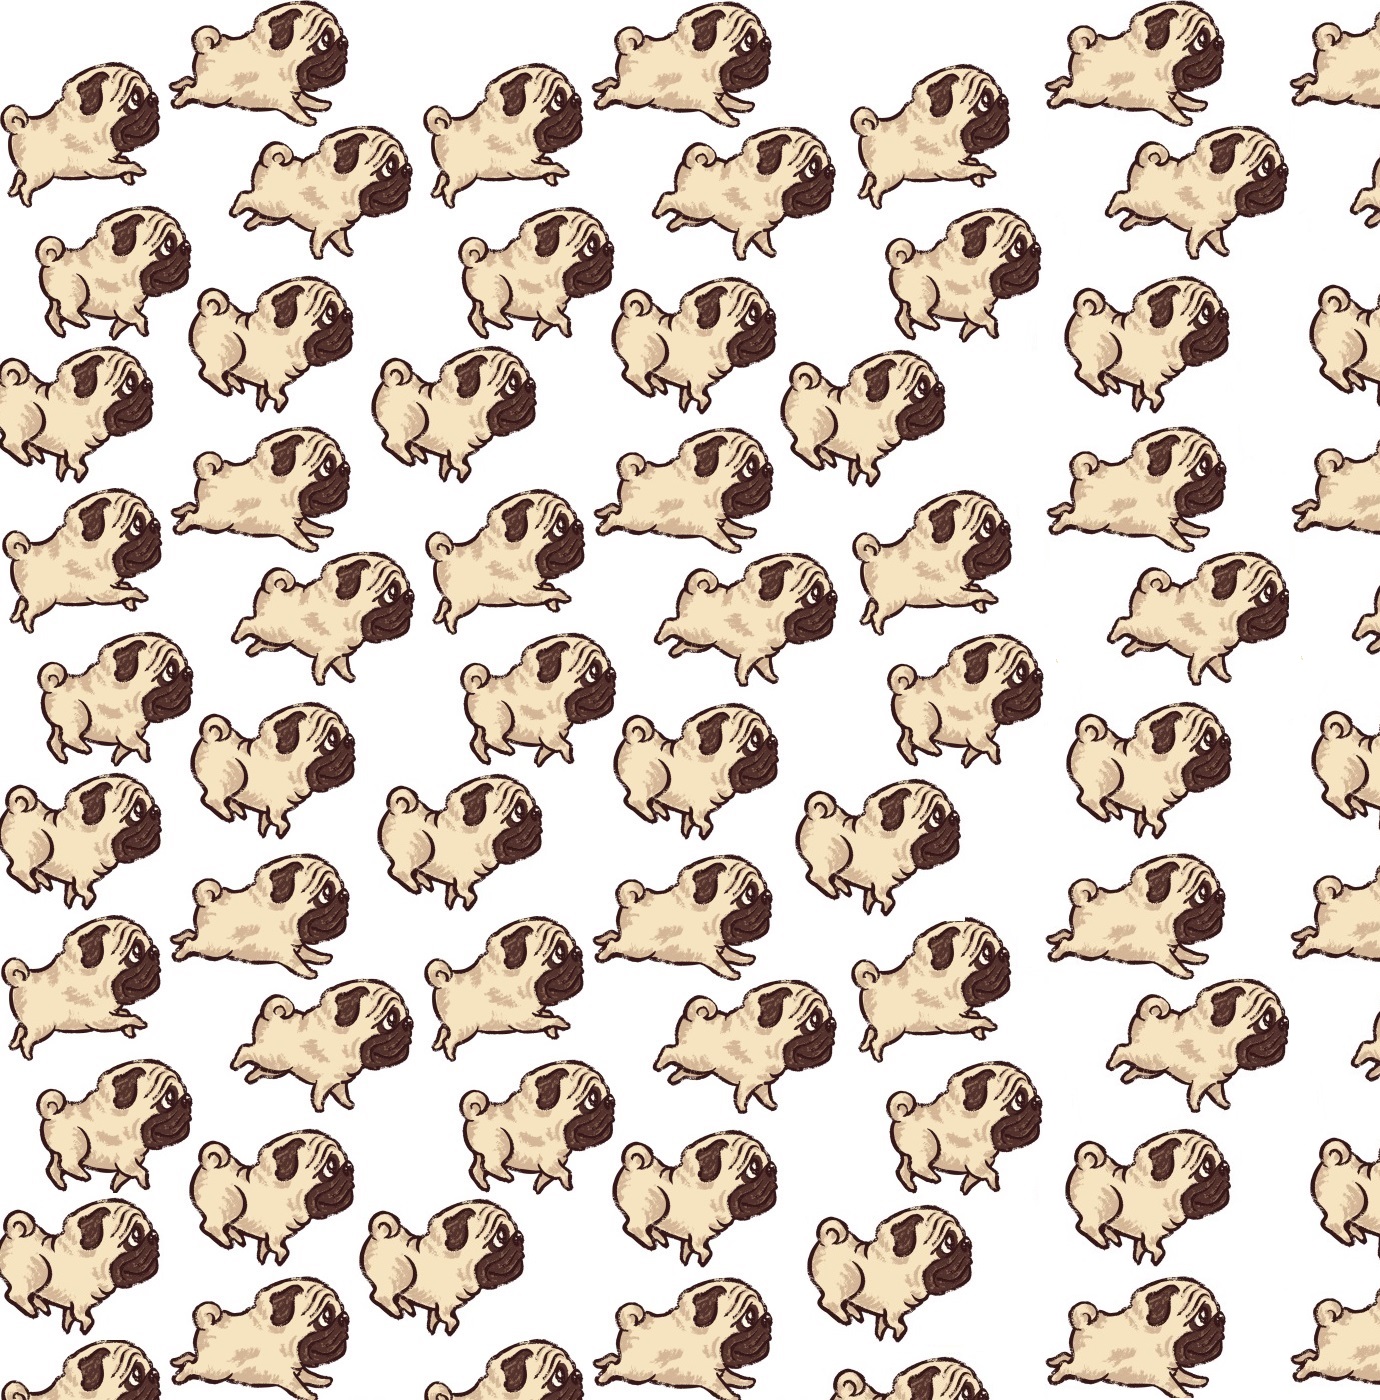 Use This Pattern To Make A Cute Pug Background For Your